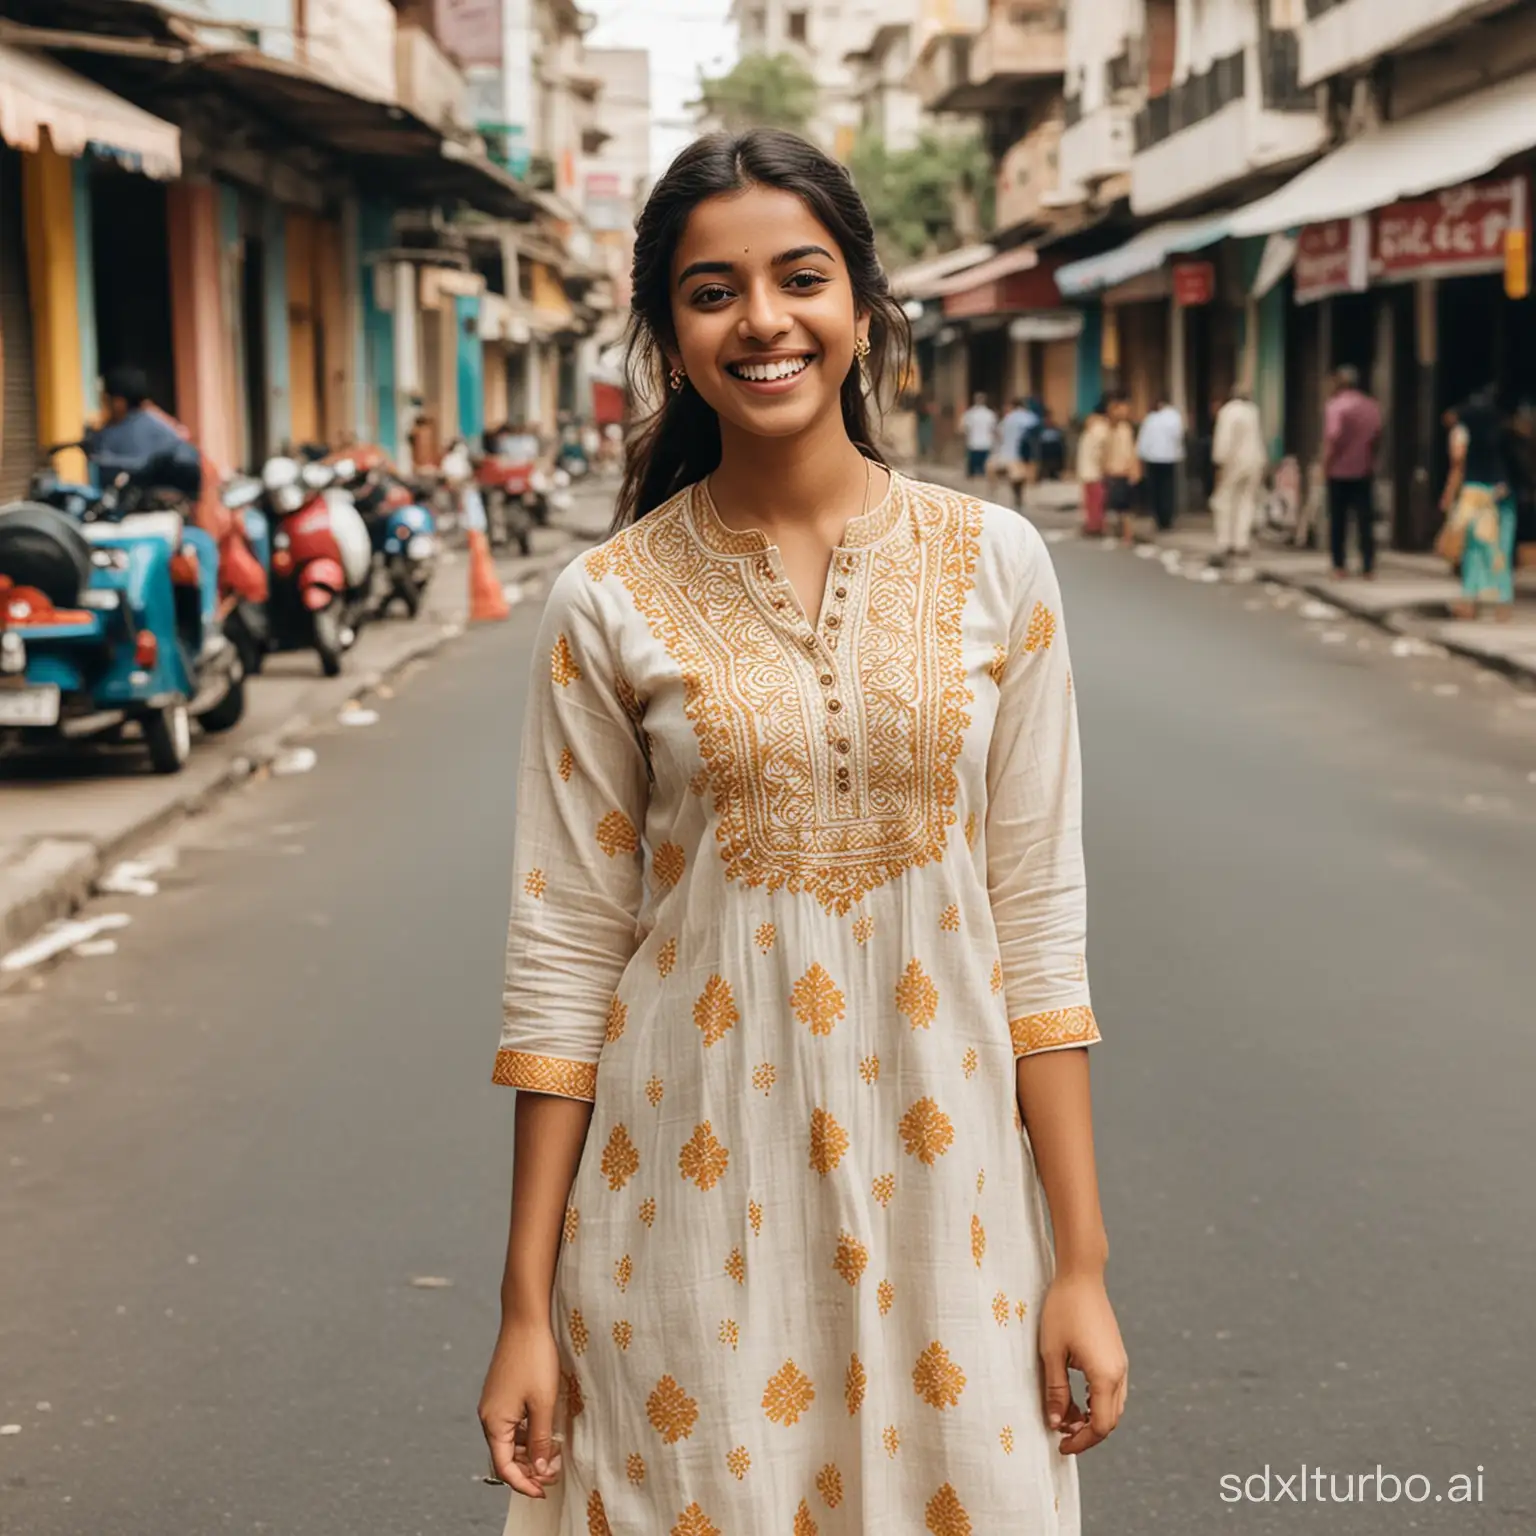 A girl in Indian attire wearing kurta and smiling on a random street